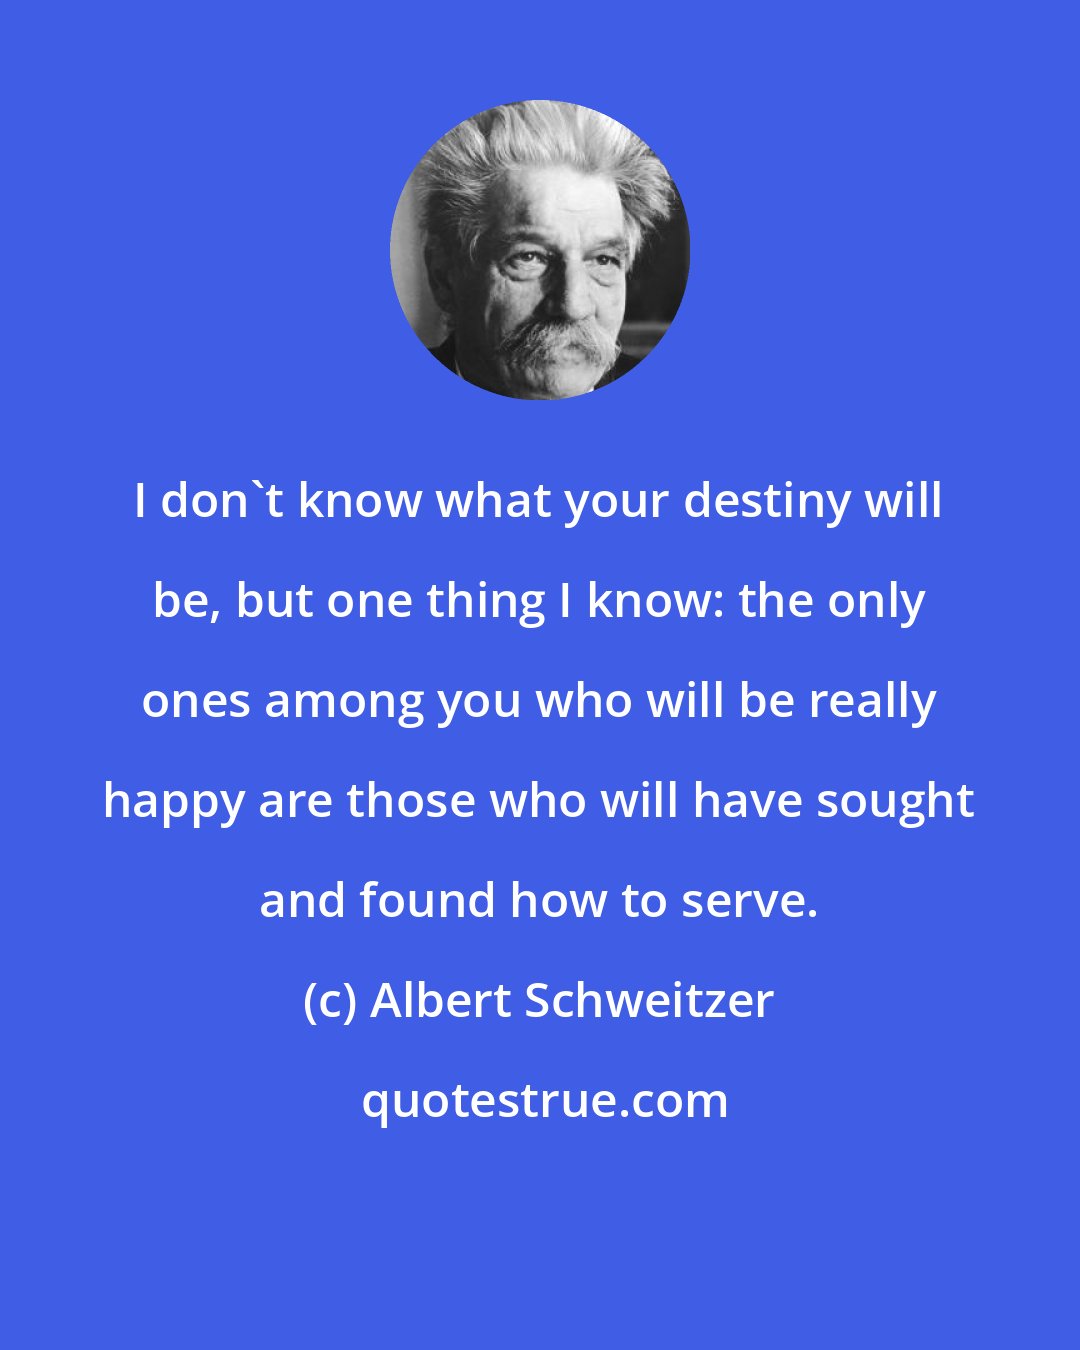 Albert Schweitzer: I don't know what your destiny will be, but one thing I know: the only ones among you who will be really happy are those who will have sought and found how to serve.